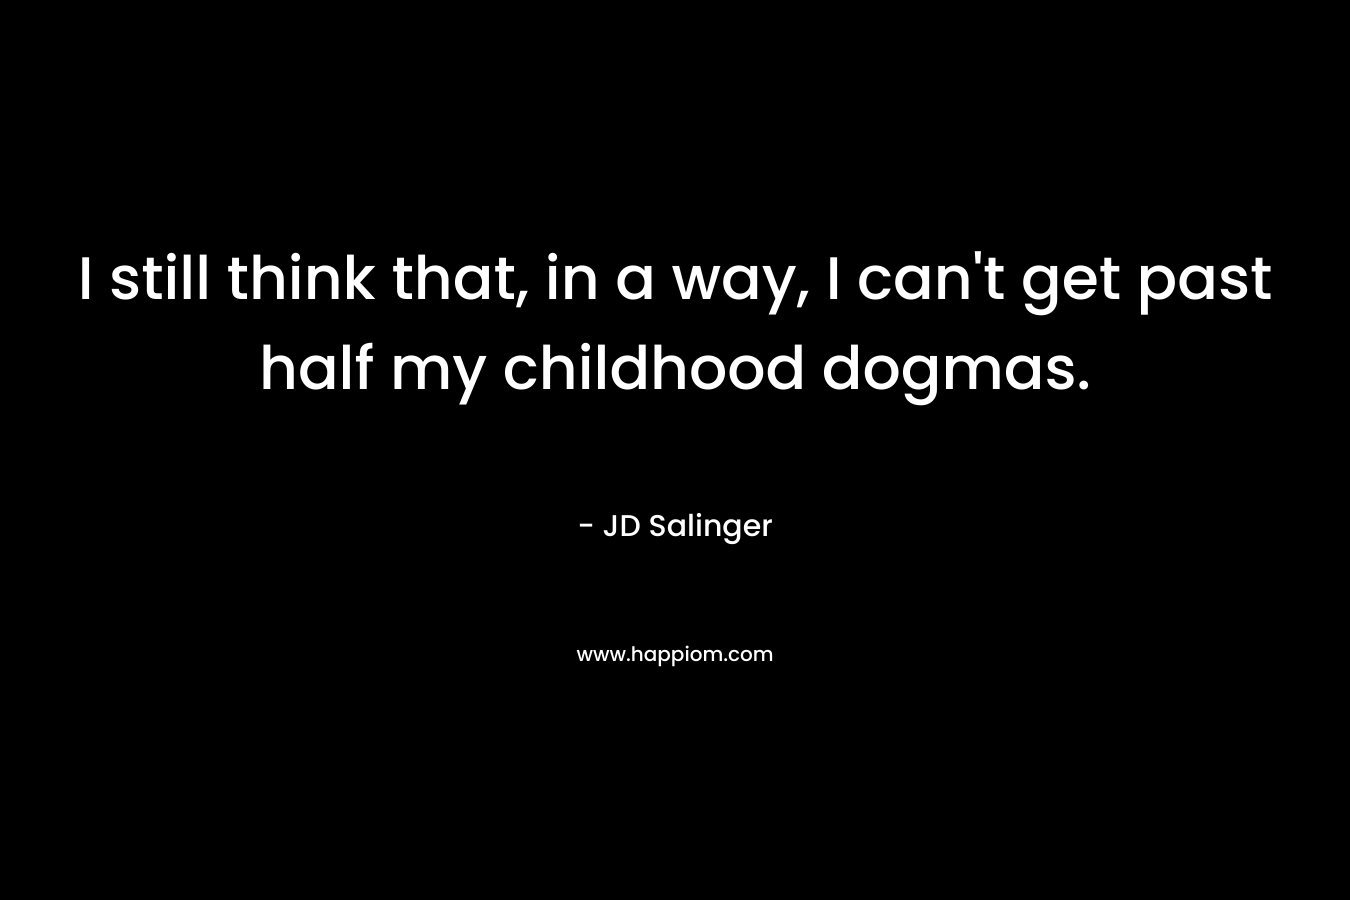 I still think that, in a way, I can’t get past half my childhood dogmas. – JD Salinger